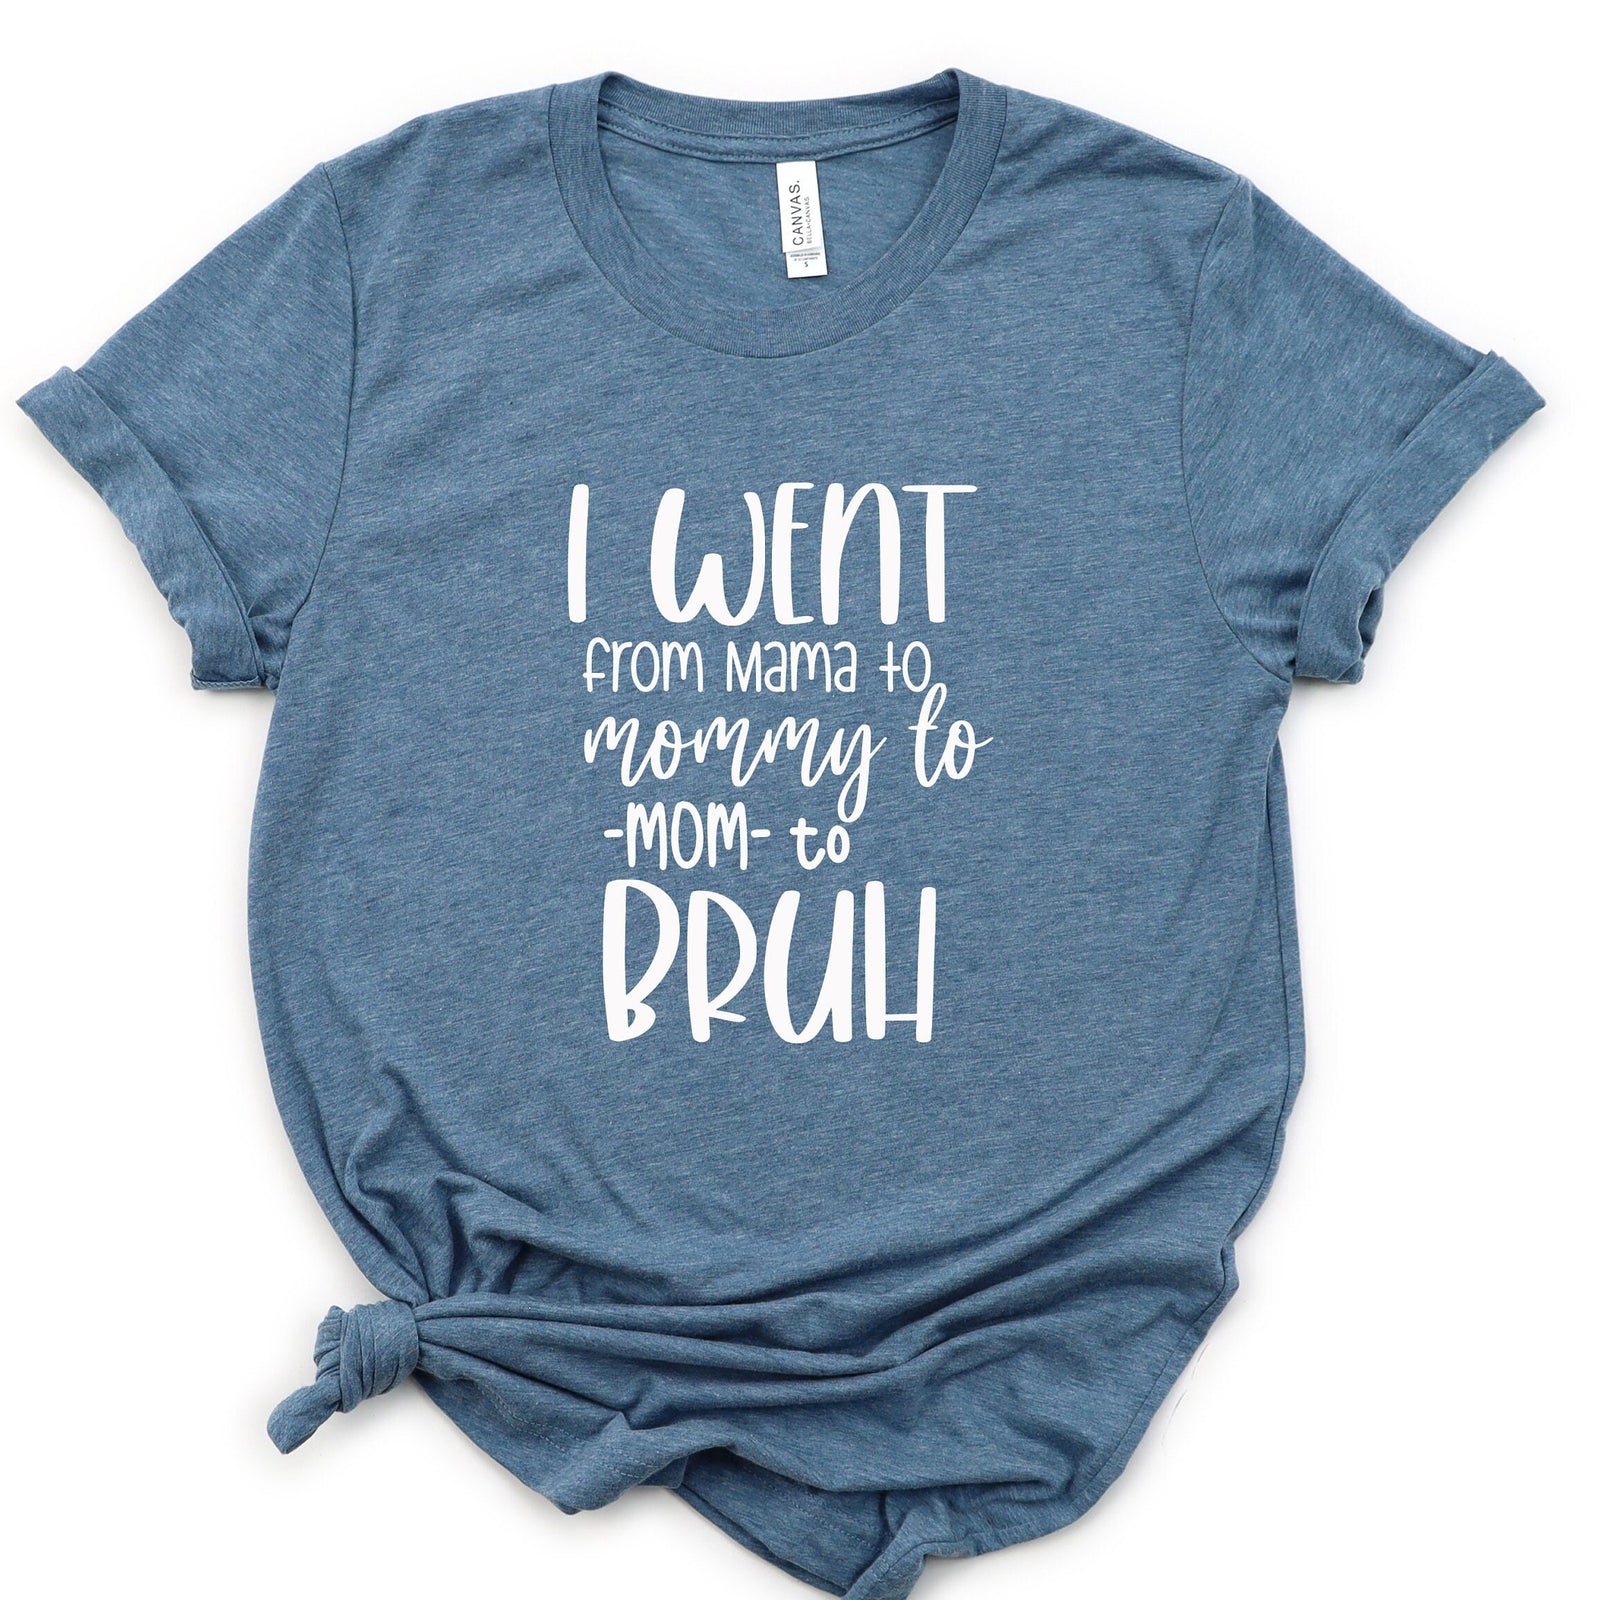 I Went From Mama to Mommy to Mom to Bruh - Mom Life T Shirt - Mother's Day Gift Idea - Mom of Boys Shirt - Mom Gift Shirt